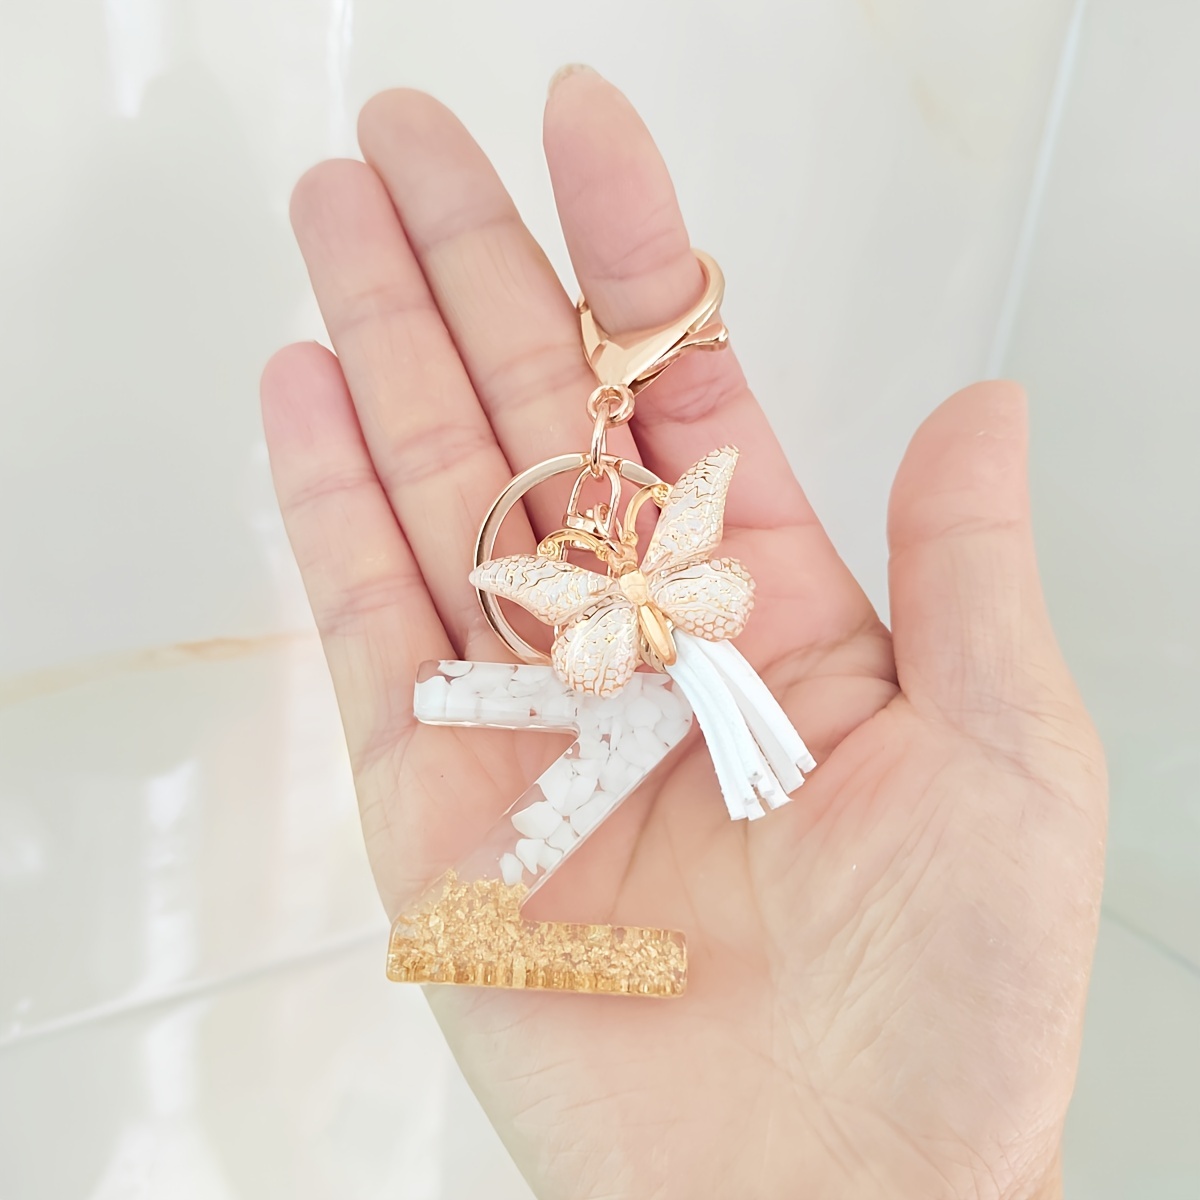 Crafty Angel Art E - Letter - Initial Resin Keychain Aqua solitd Color with Shimmering Mix of Glitter on The Front with Pearls Along with A Décor of Cow Head Along